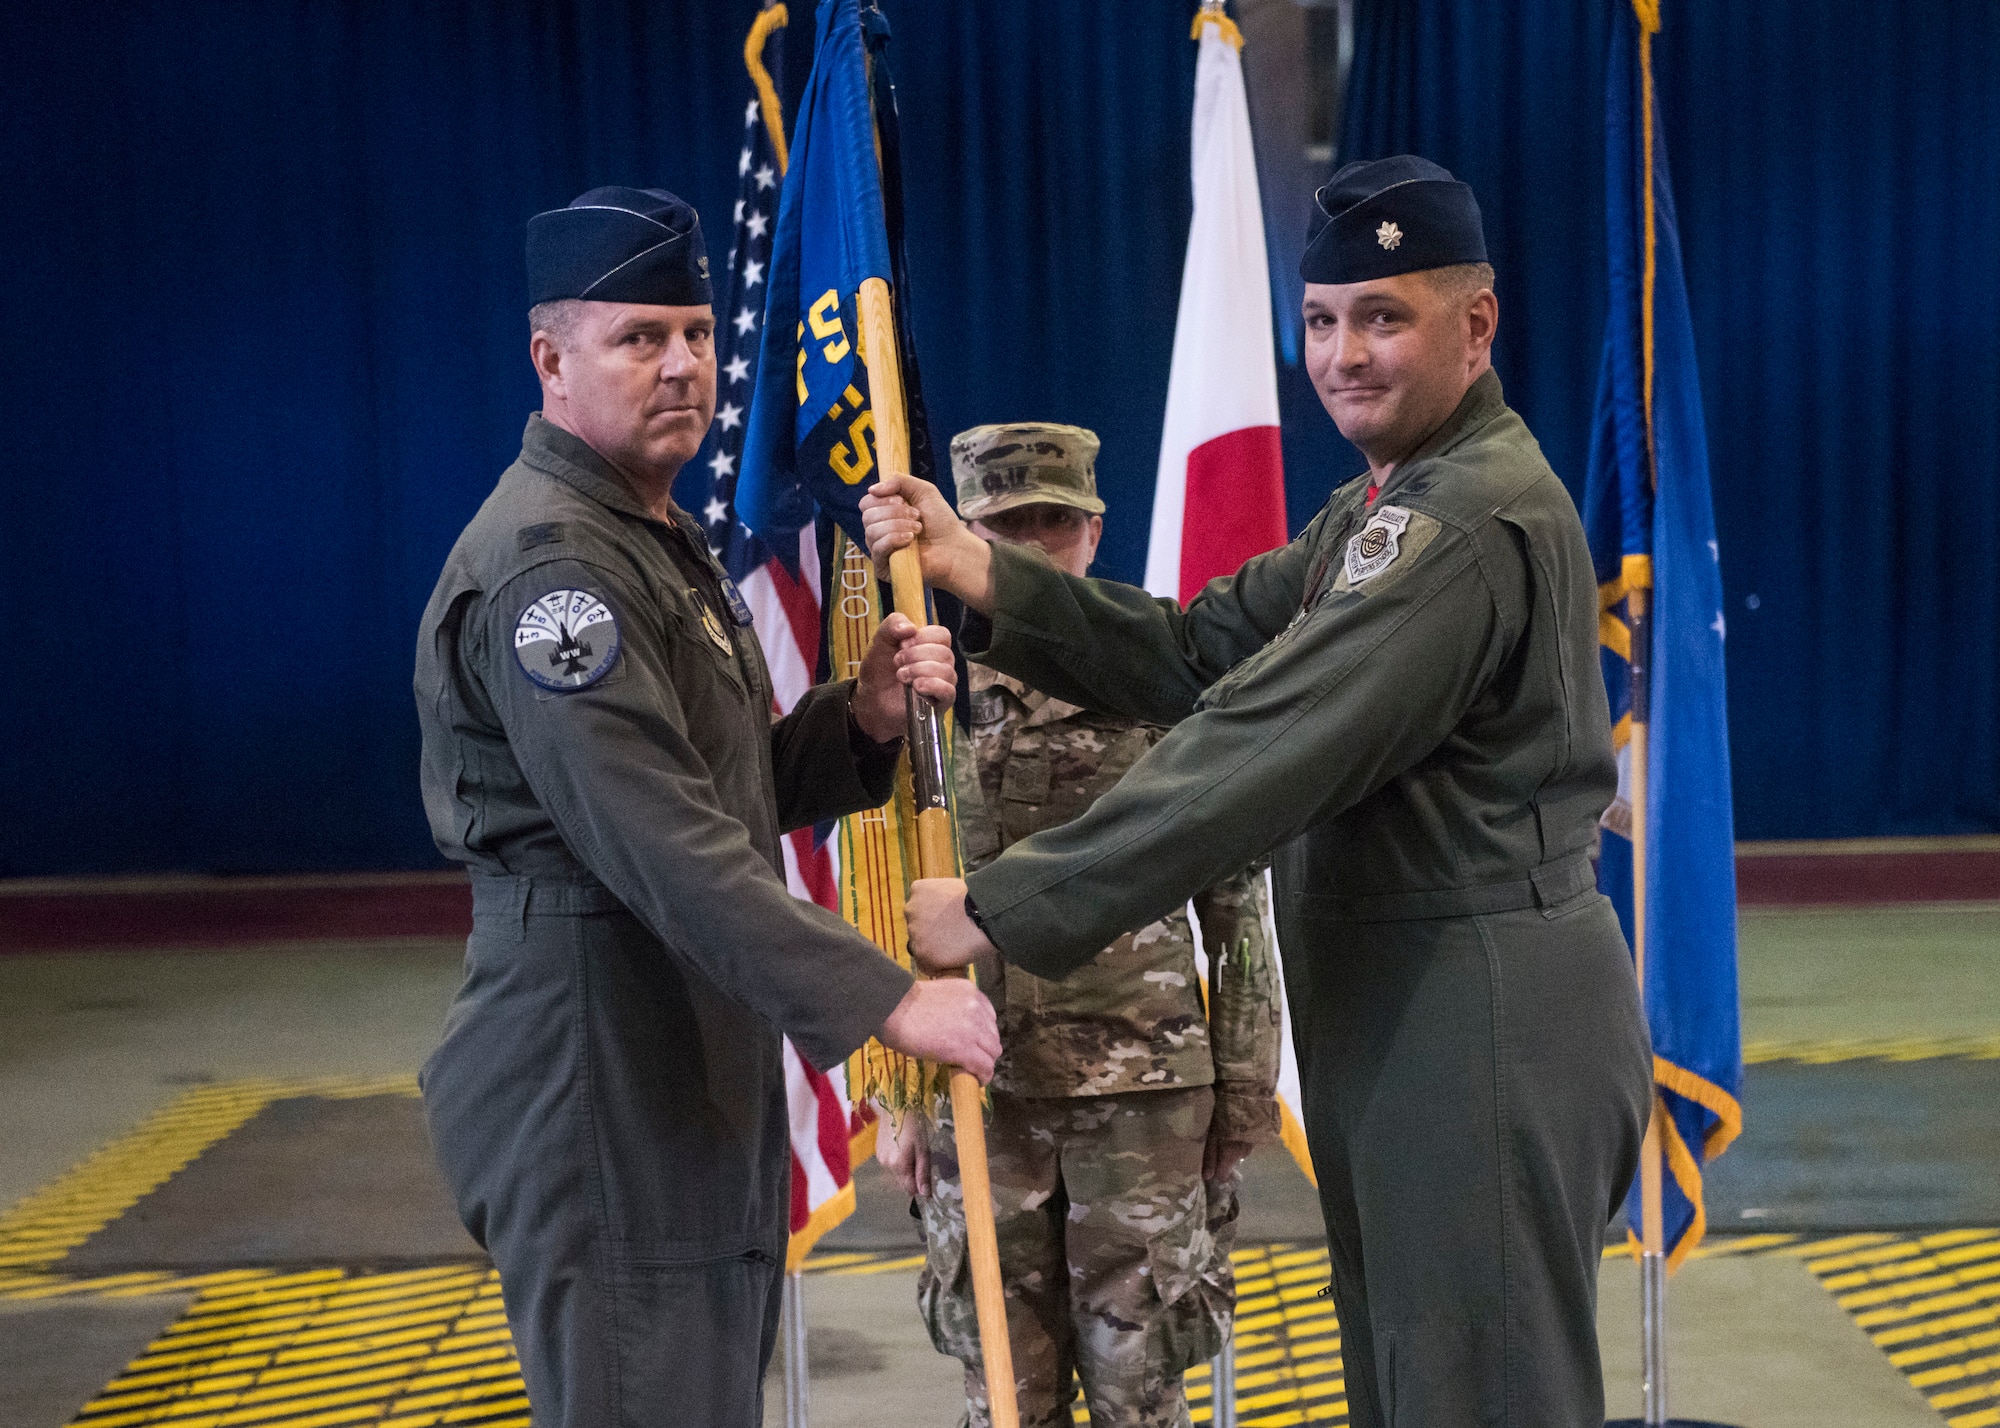 Individuals participate in a change of command ceremony indoors